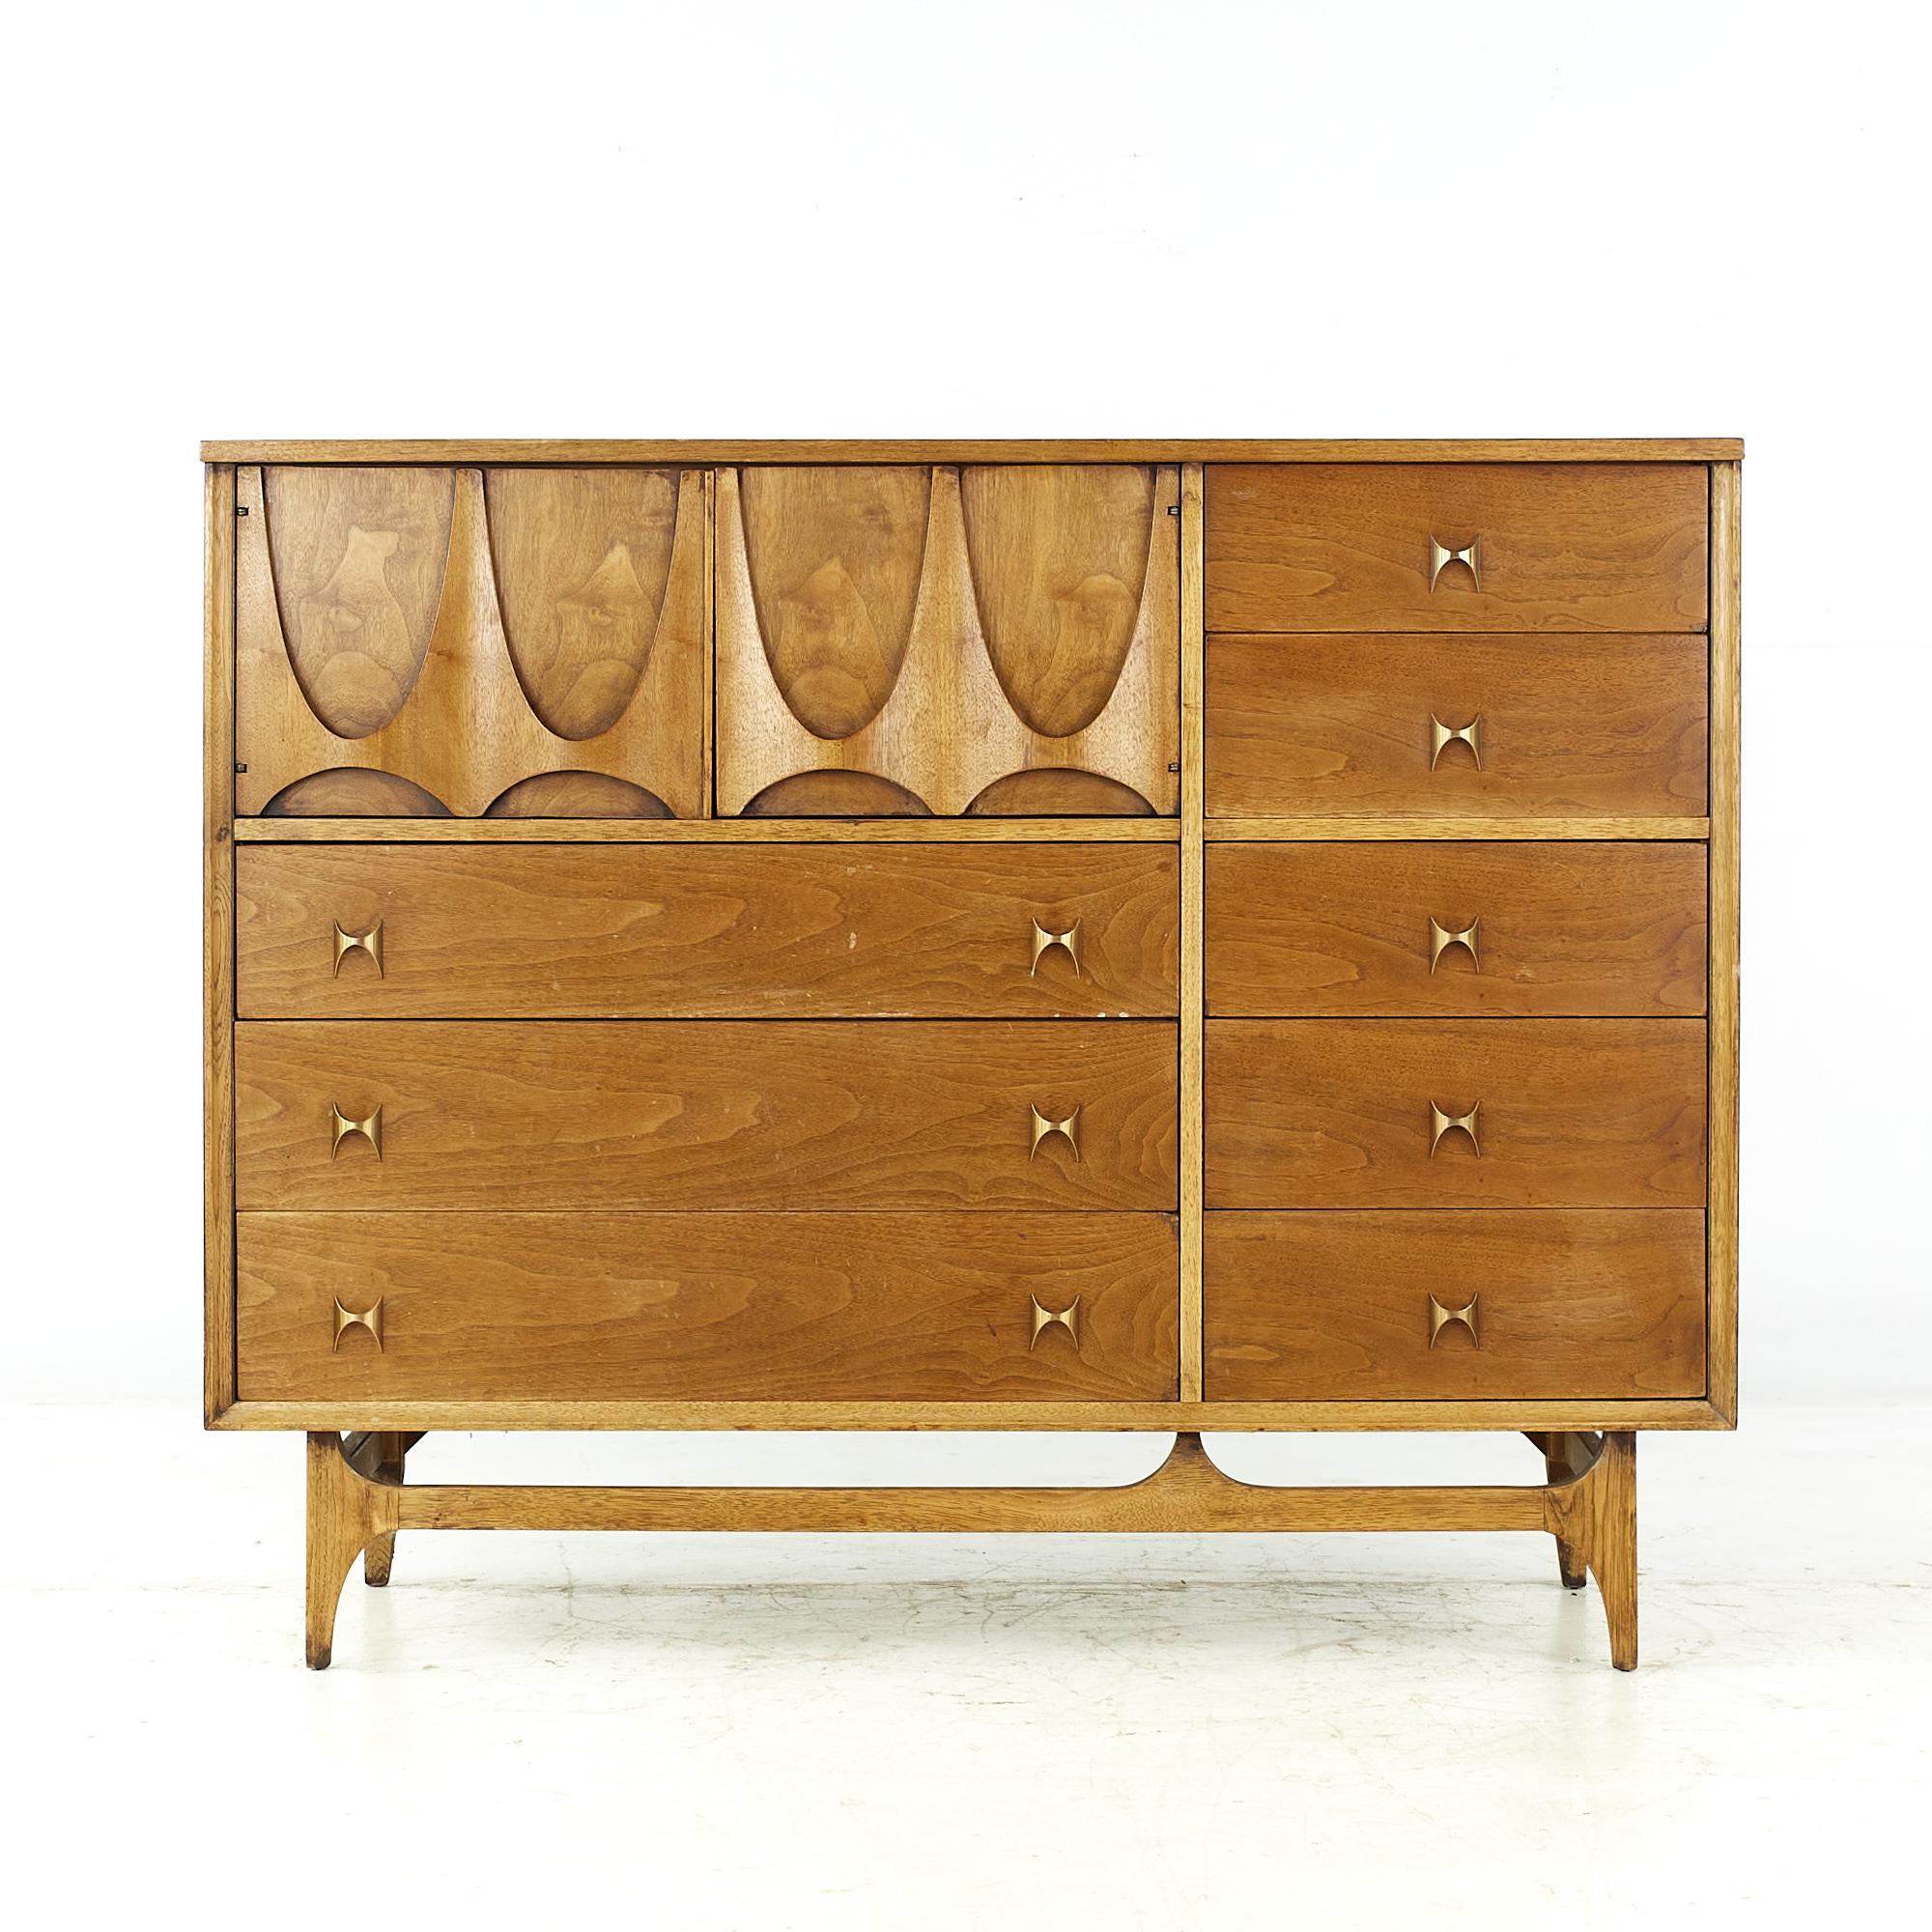 Broyhill Brasilia mid-century walnut magna chest.

This chest measures: 54 wide x 19 deep x 43.25 inches high.

All pieces of furniture can be had in what we call restored vintage condition. That means the piece is restored upon purchase so it’s